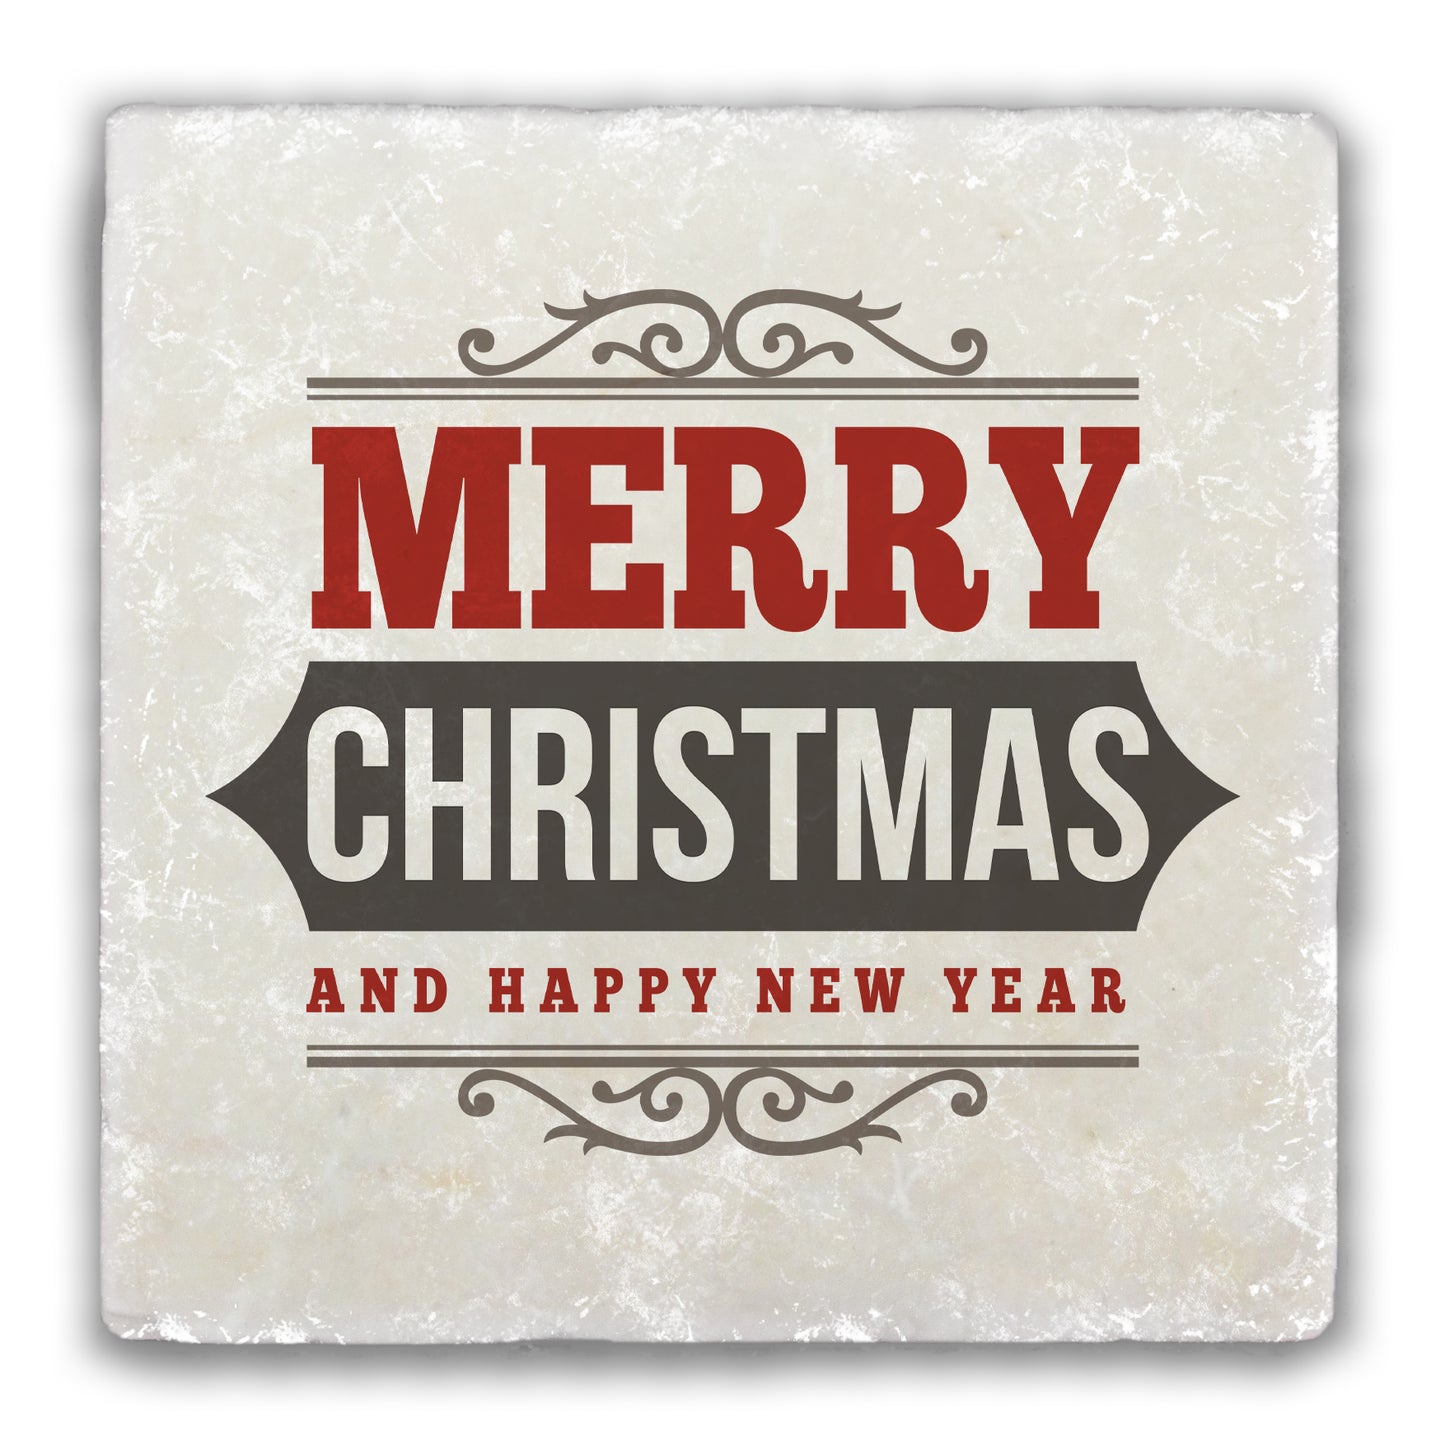 Merry Christmas and Happy New Year Tumbled Stone Coaster